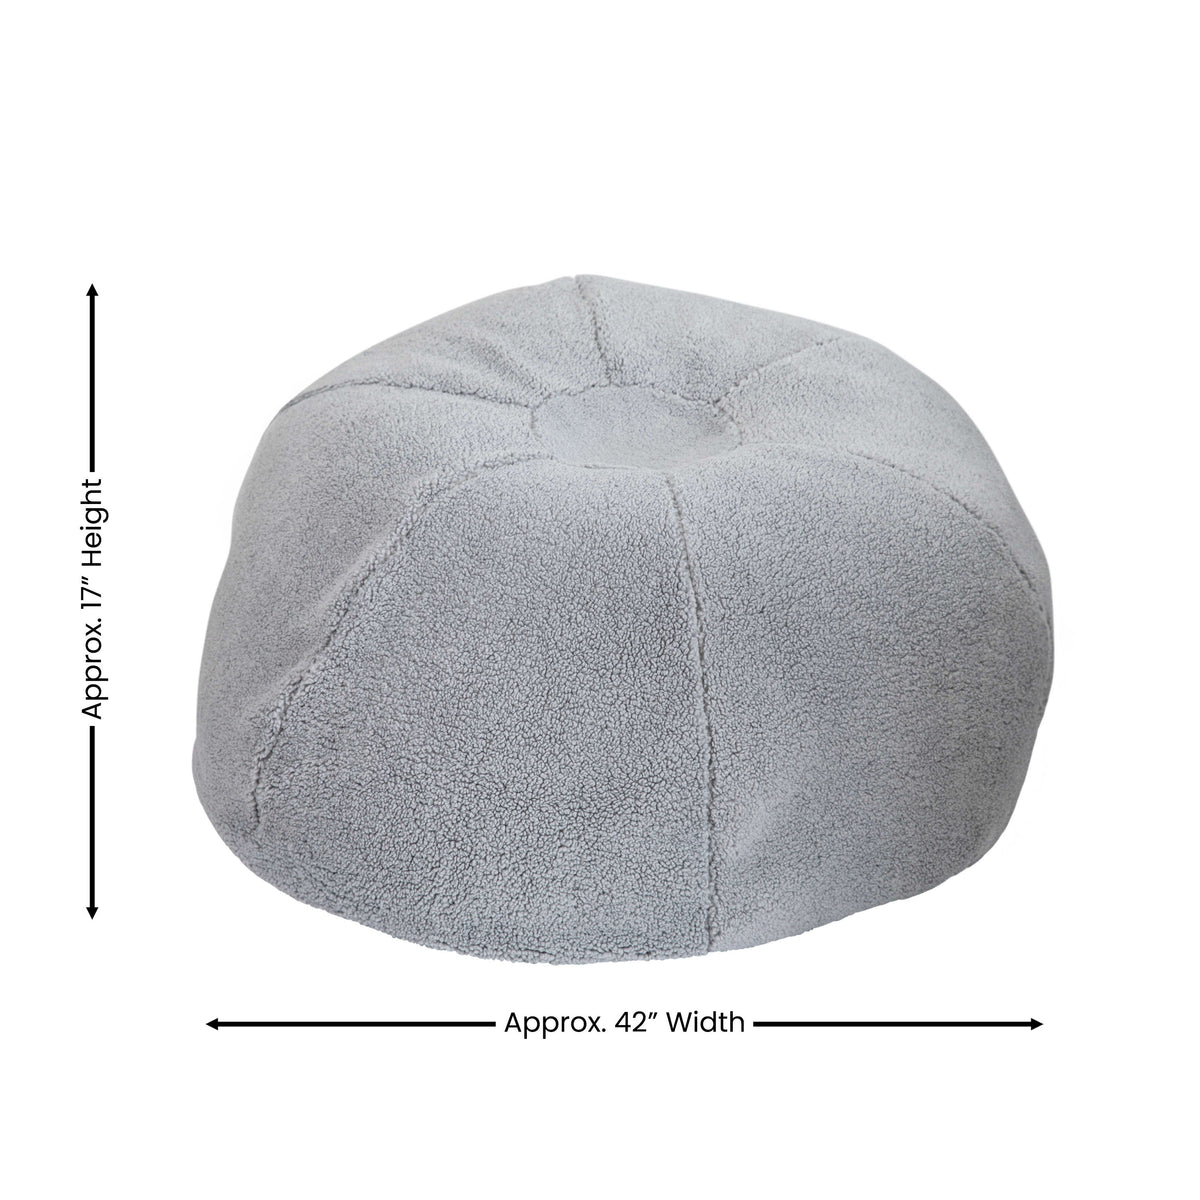 Gray Sherpa |#| Large Faux Sherpa Refillable Bean Bag Chair for Kids and Teens - Gray